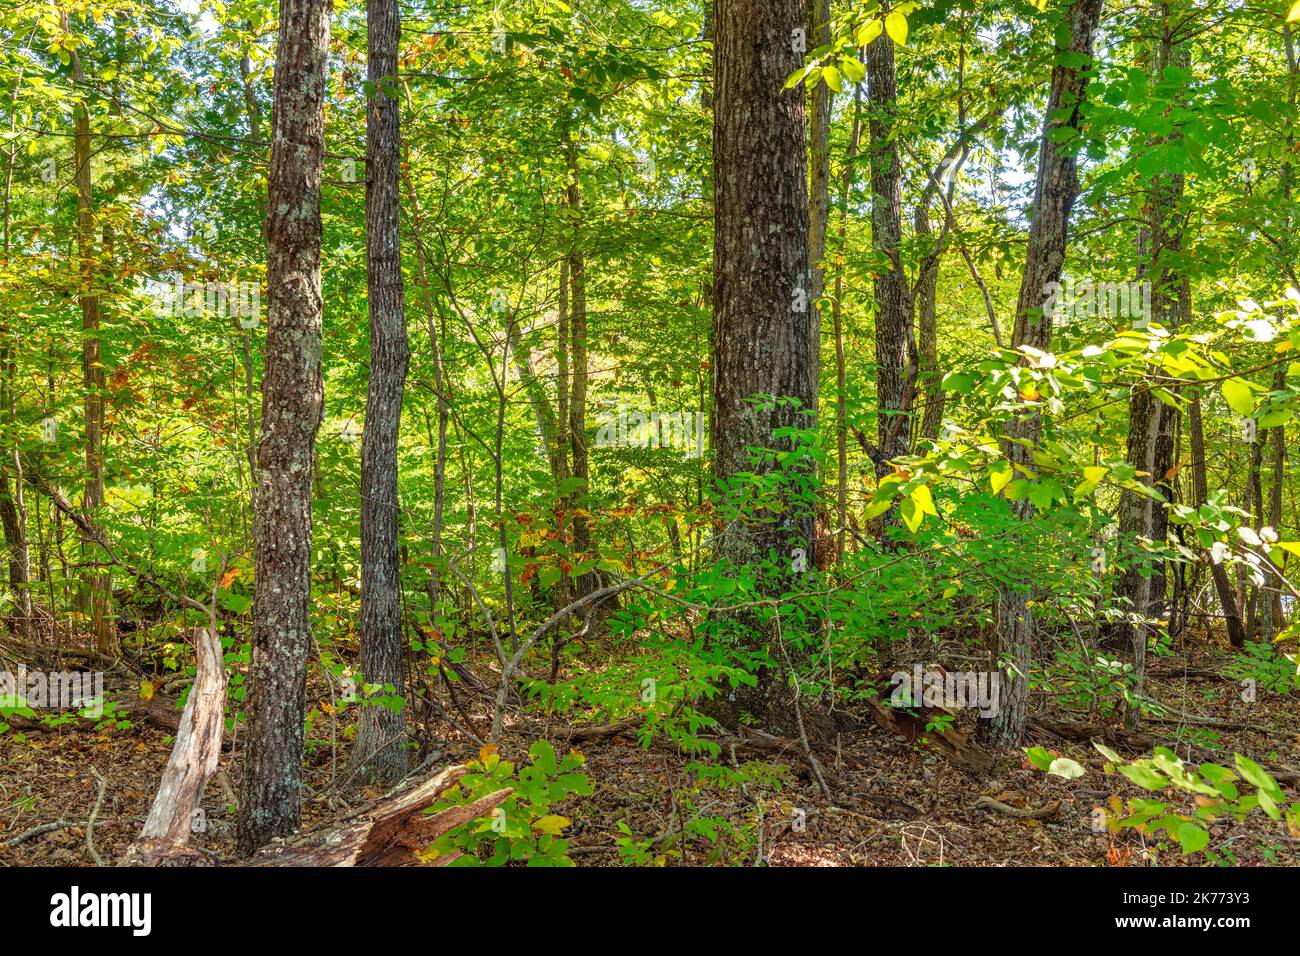 View of the Catoosa National park in Tennessee looking into the woods shows the vibrant, healthy foliage and the peaceful, secluded landscape during a Stock Photo